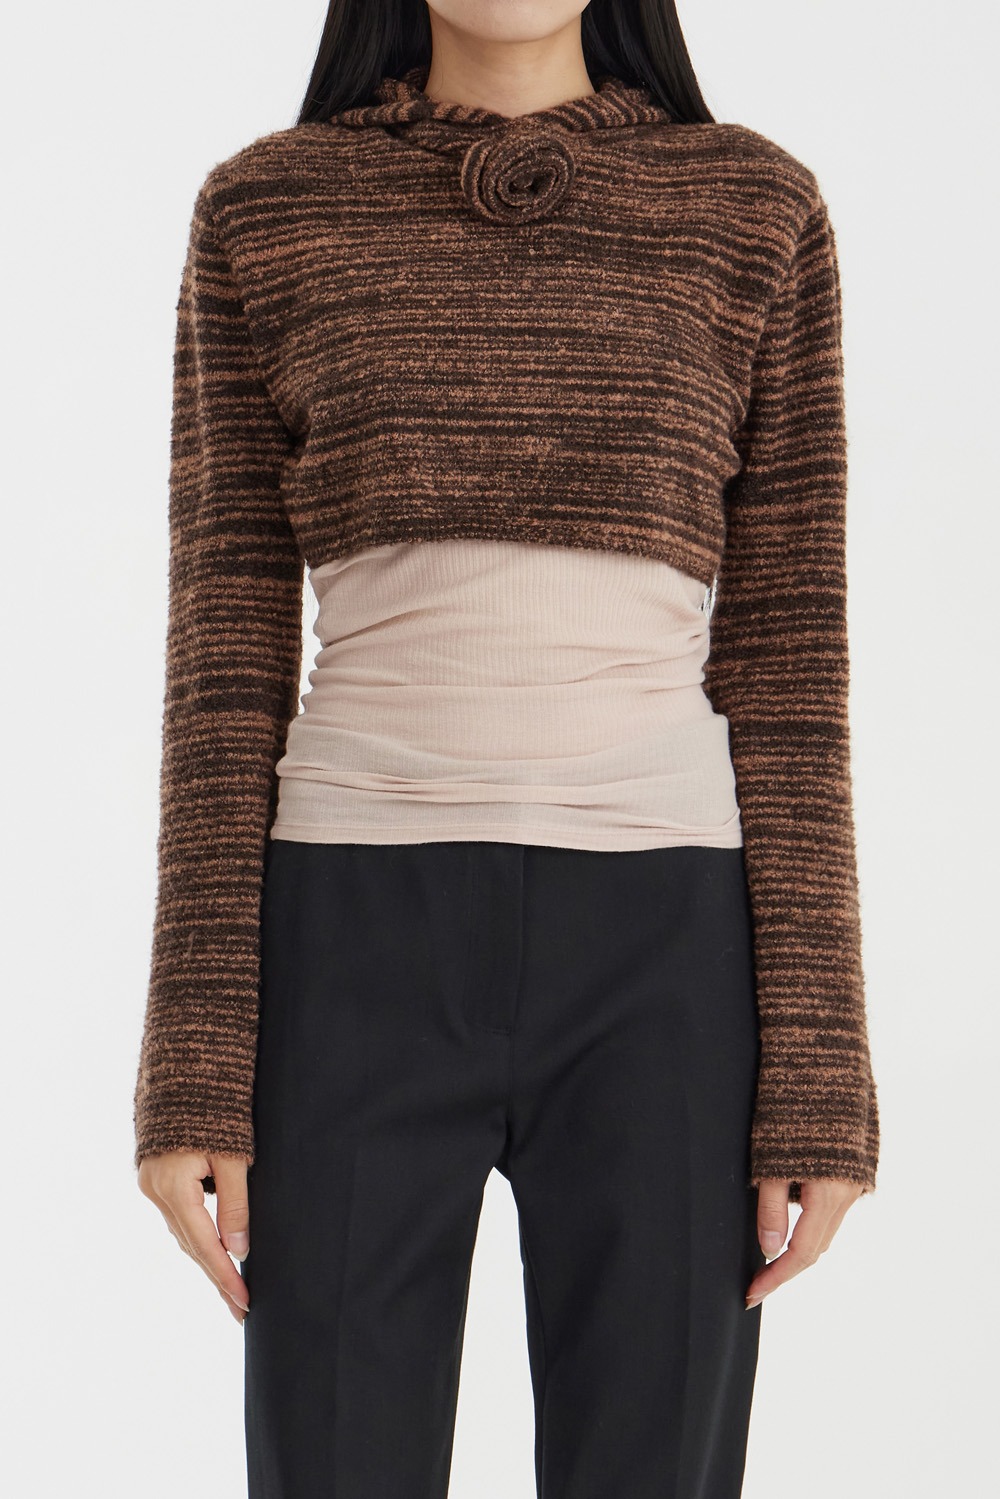 Flower Corsage Knitted Top - Brown